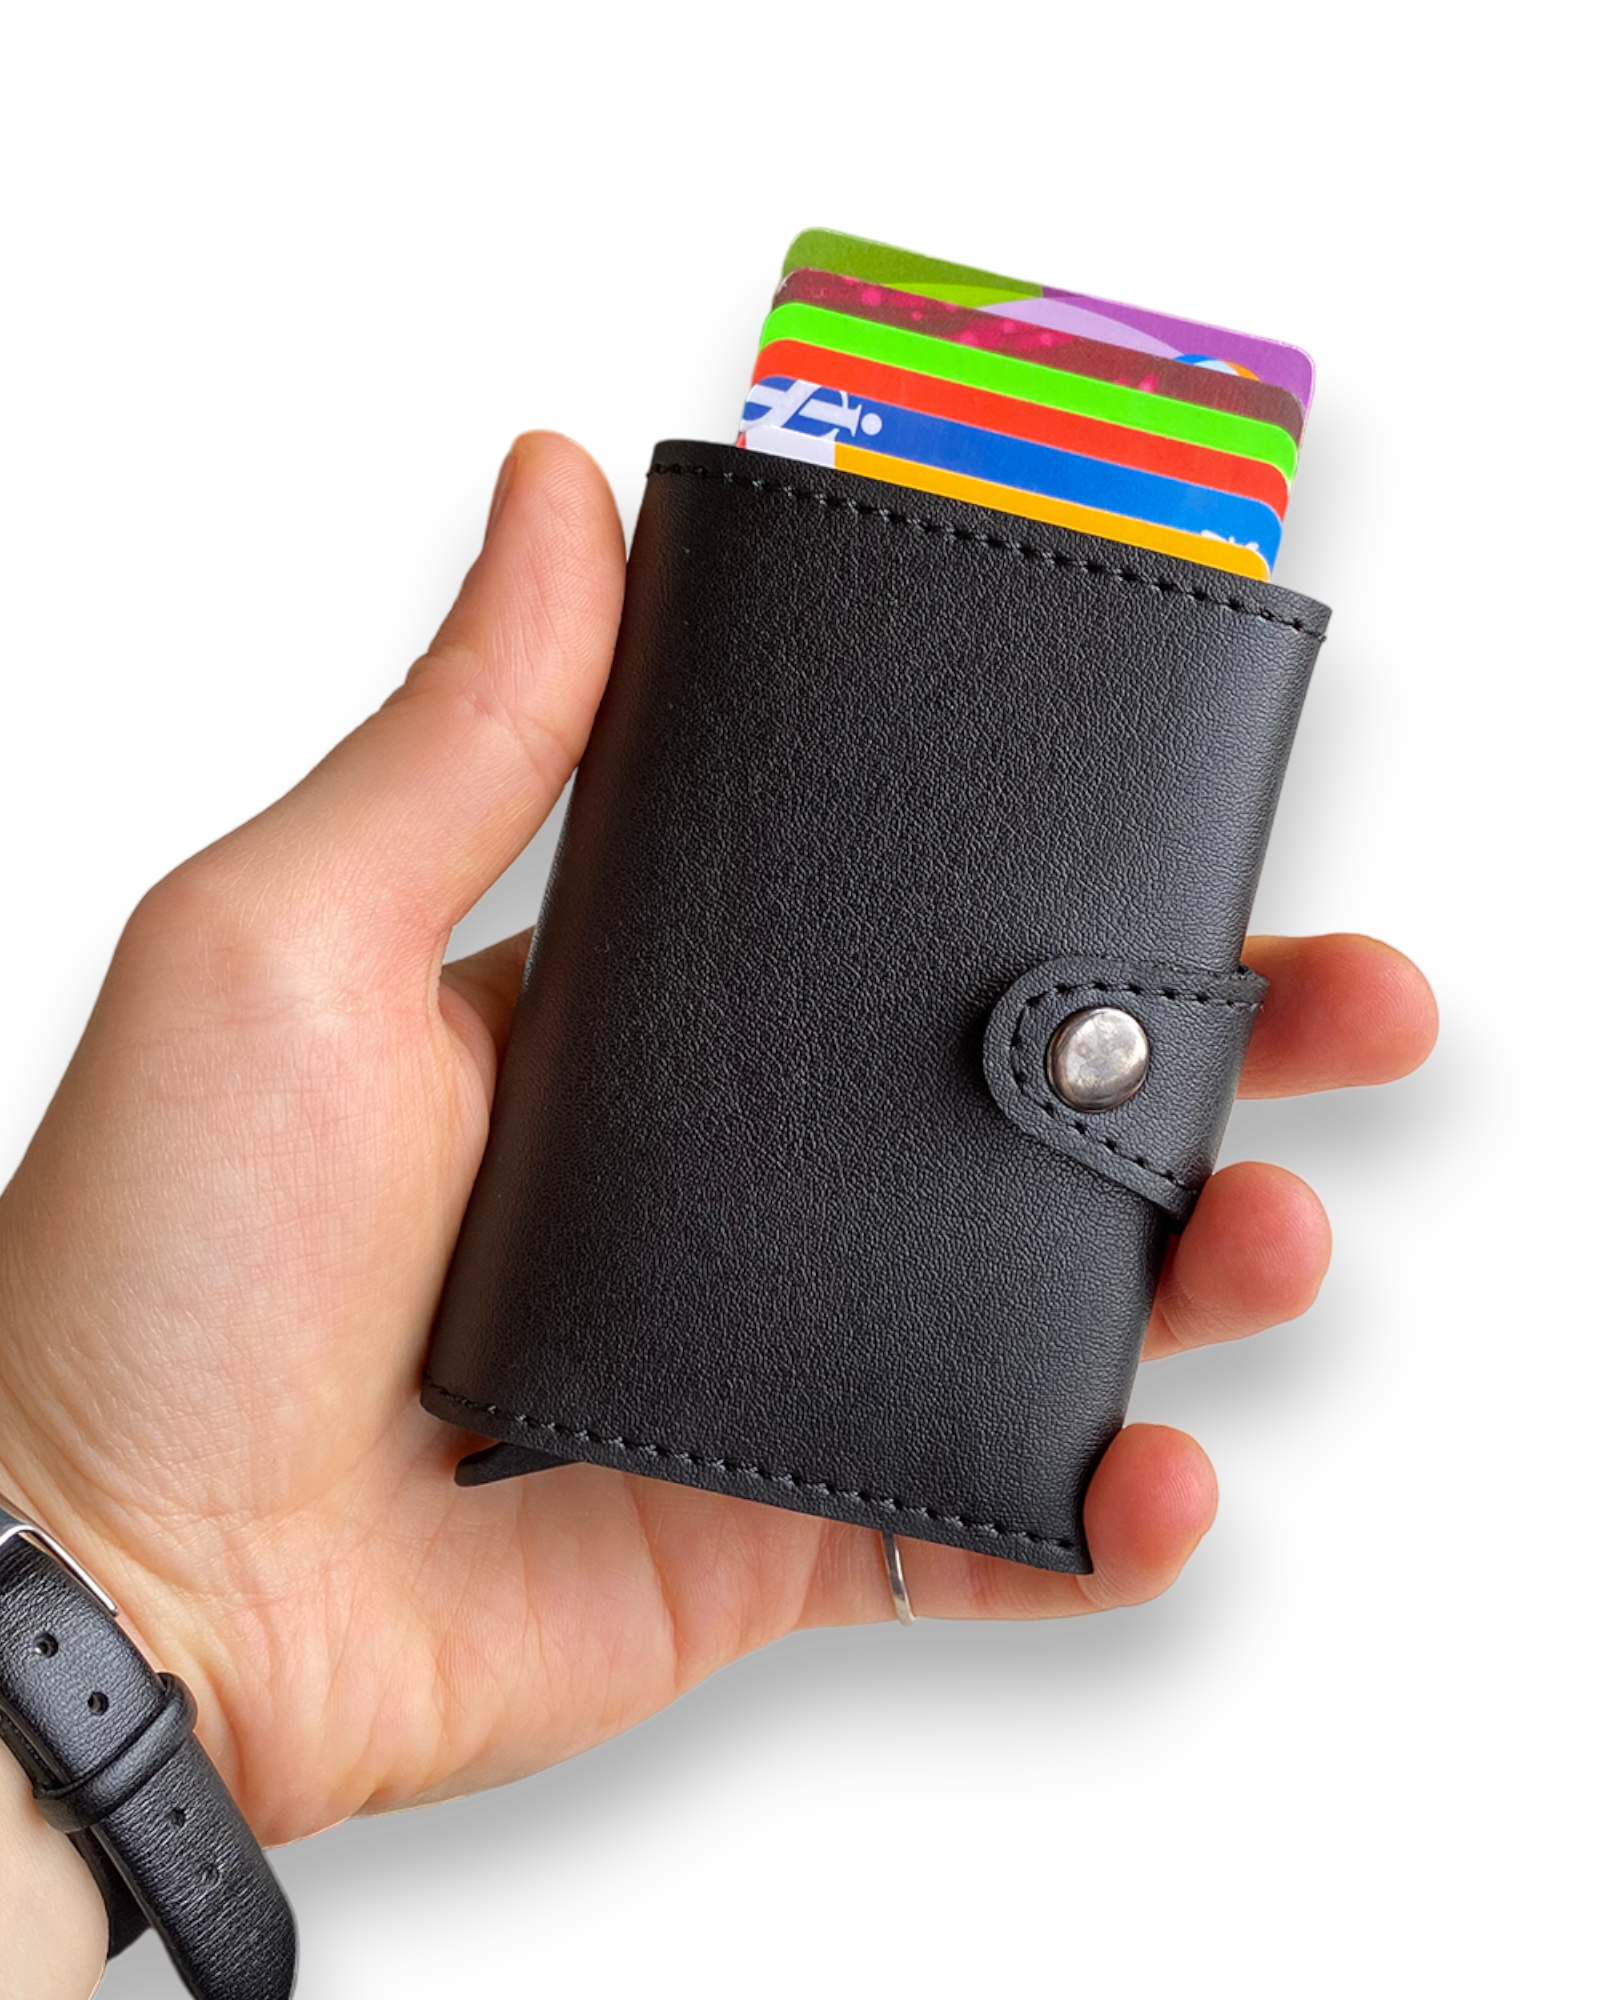 Angora - Vegan Leather RFID Mechanism Card Holder with Cash Compartment